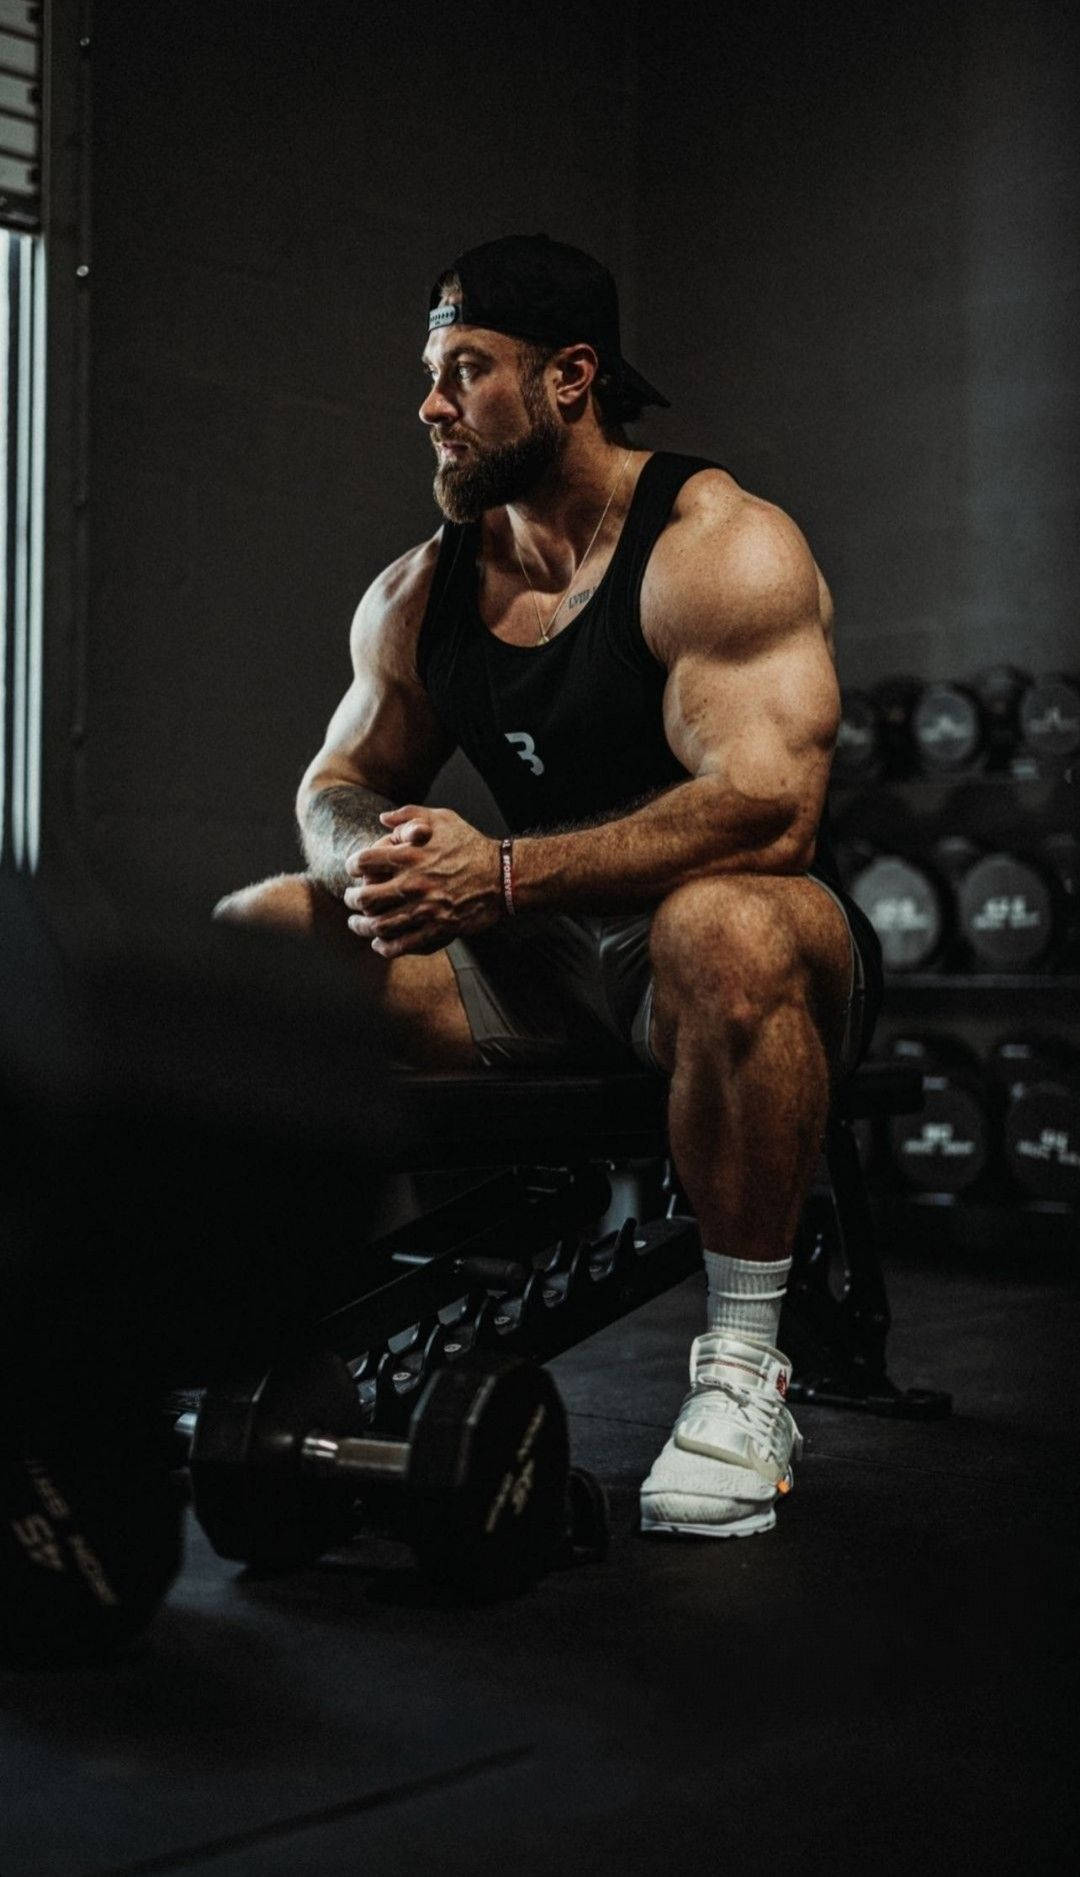 Chris Bumstead Sitting On Weight Bench Wallpaper